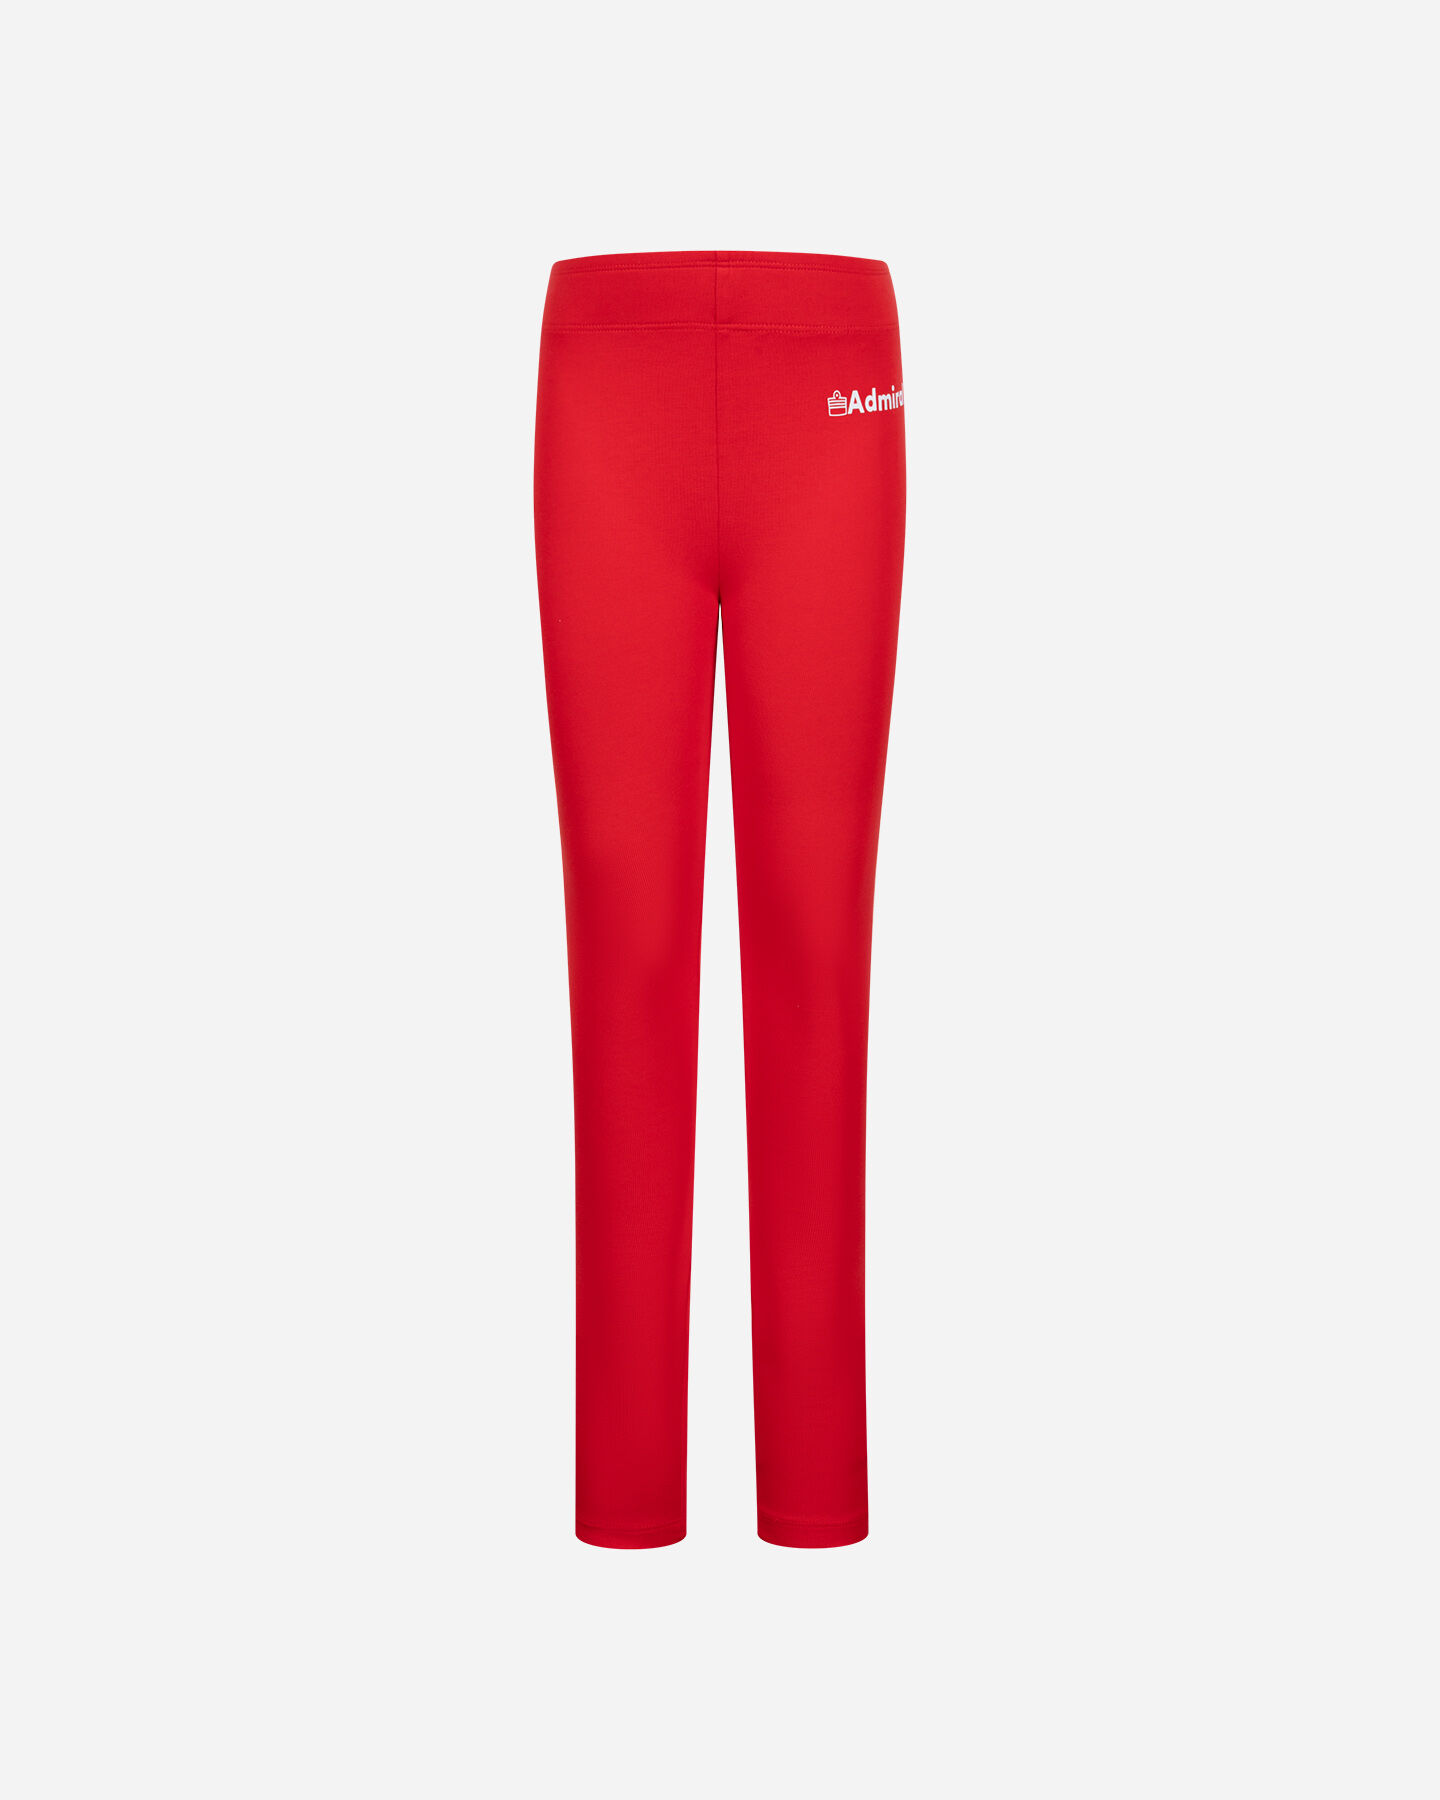  Leggings ADMIRAL BASIC SPORT JR S4129384|257|4A scatto 0